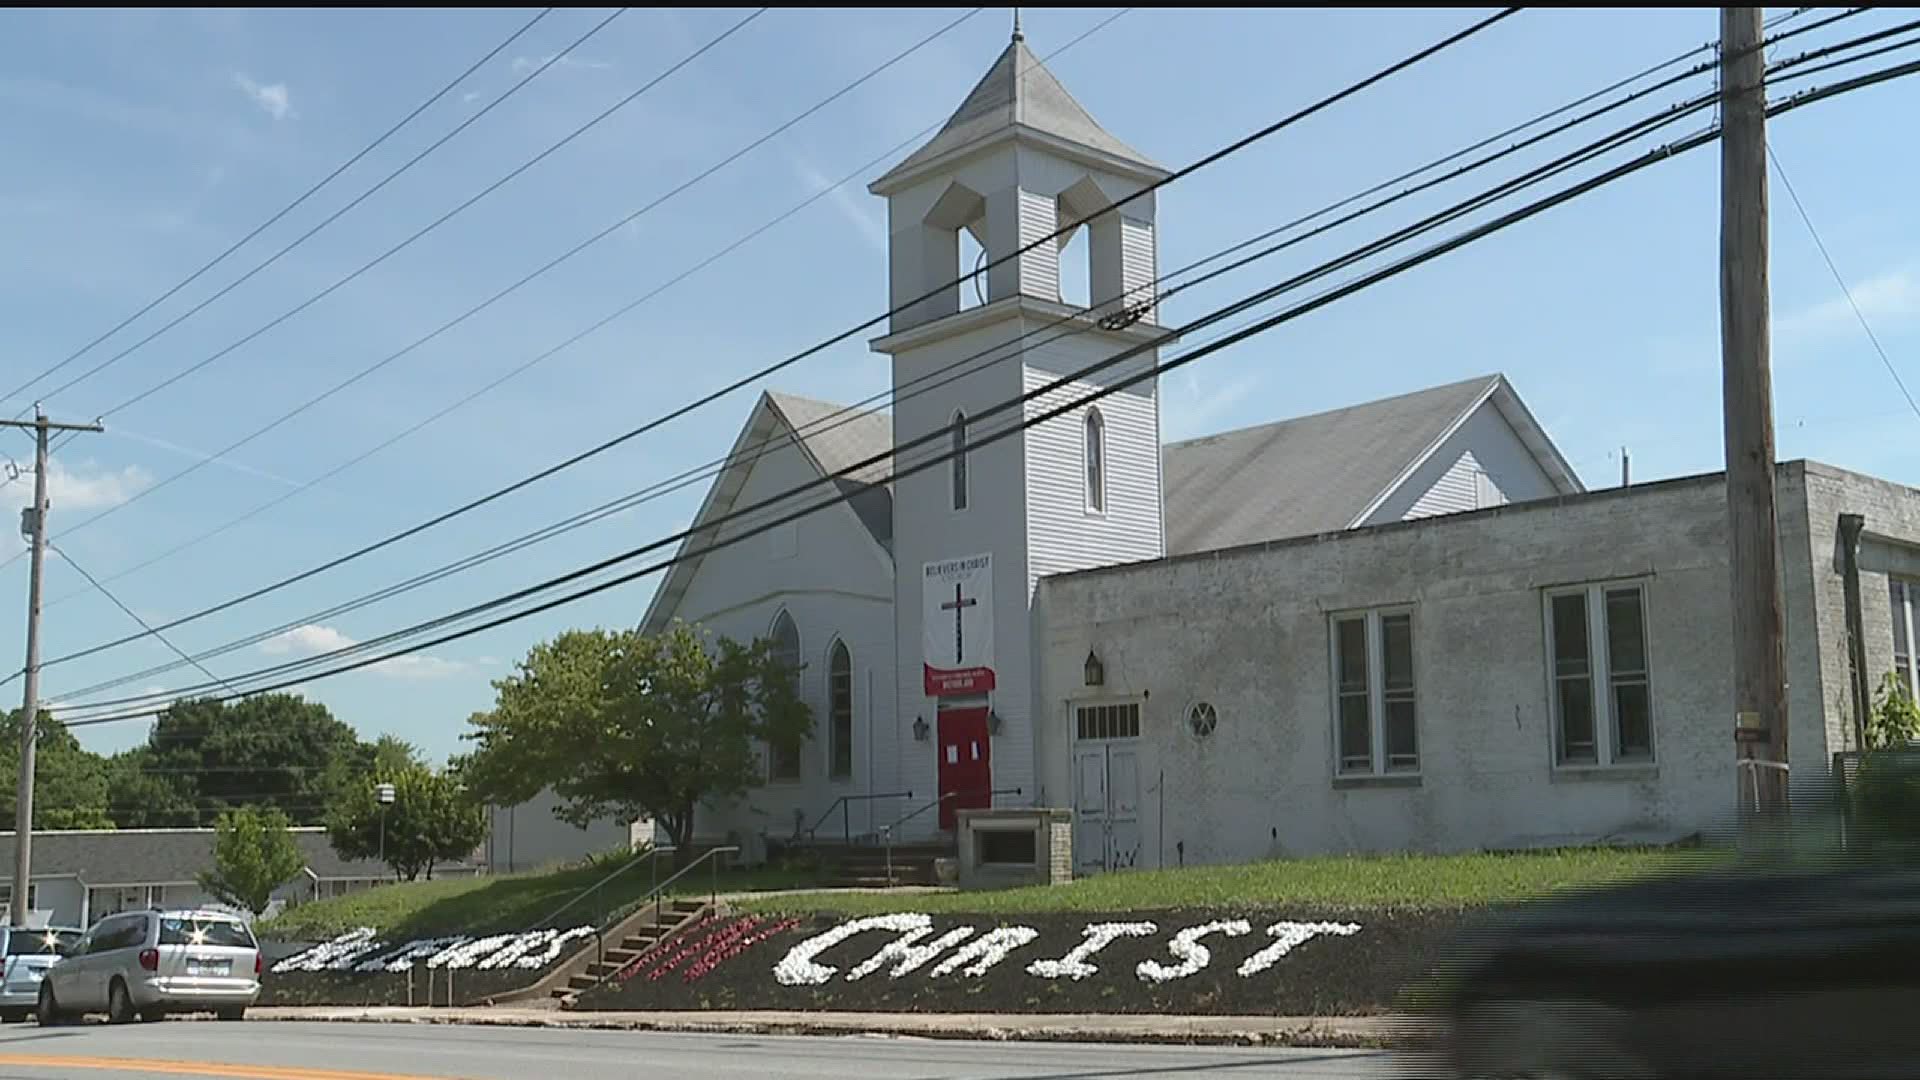 A York Haven religious community worked together to restore a church for themselves. The restoration was done entirely through volunteers and donations.